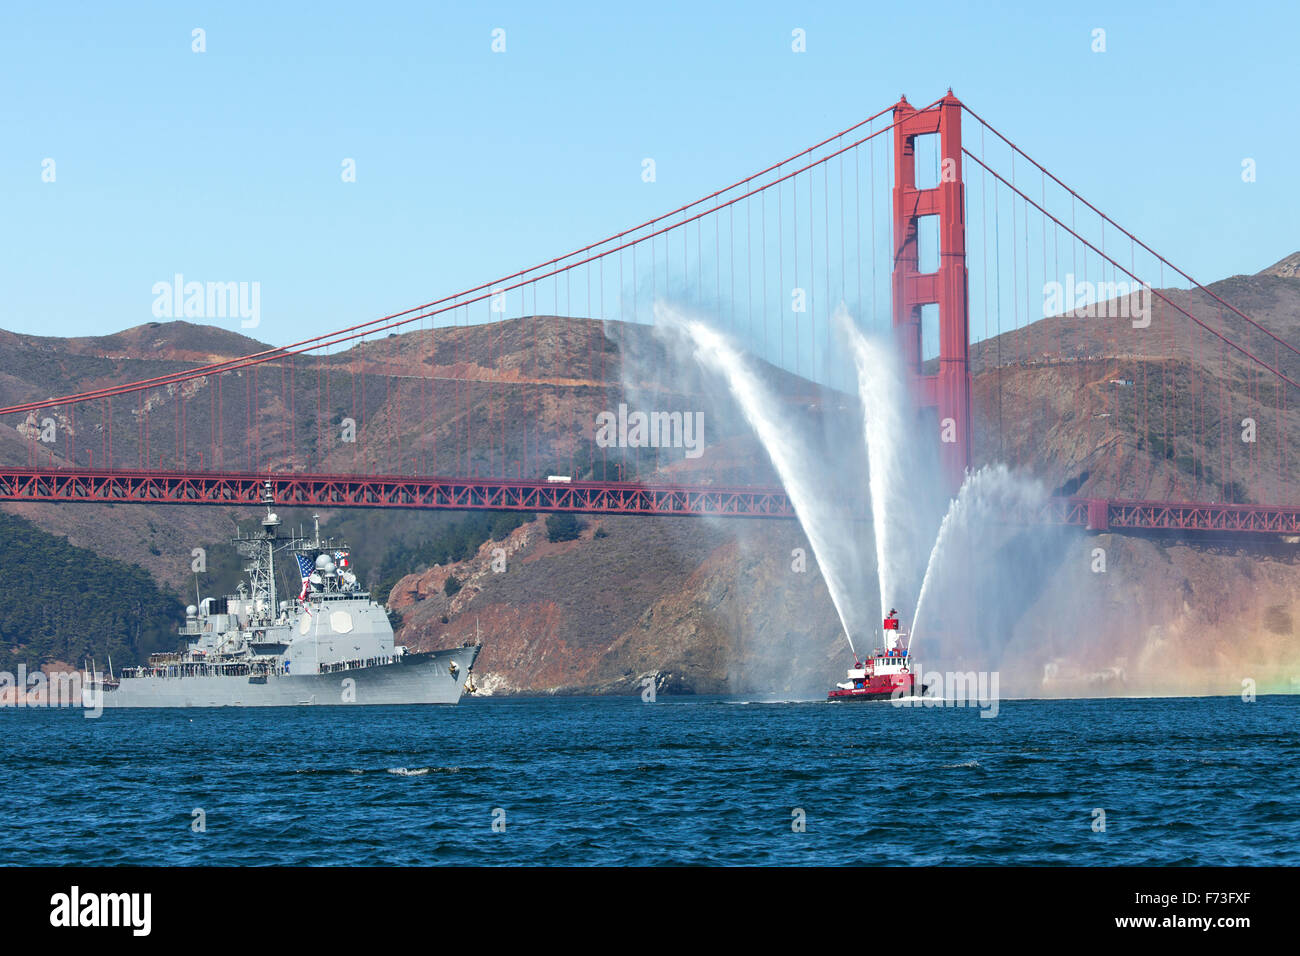 The Arleigh Burke-class guided-missile destroyer USS Ross (DDG-71) is escorted through the Golden Gate. Stock Photo